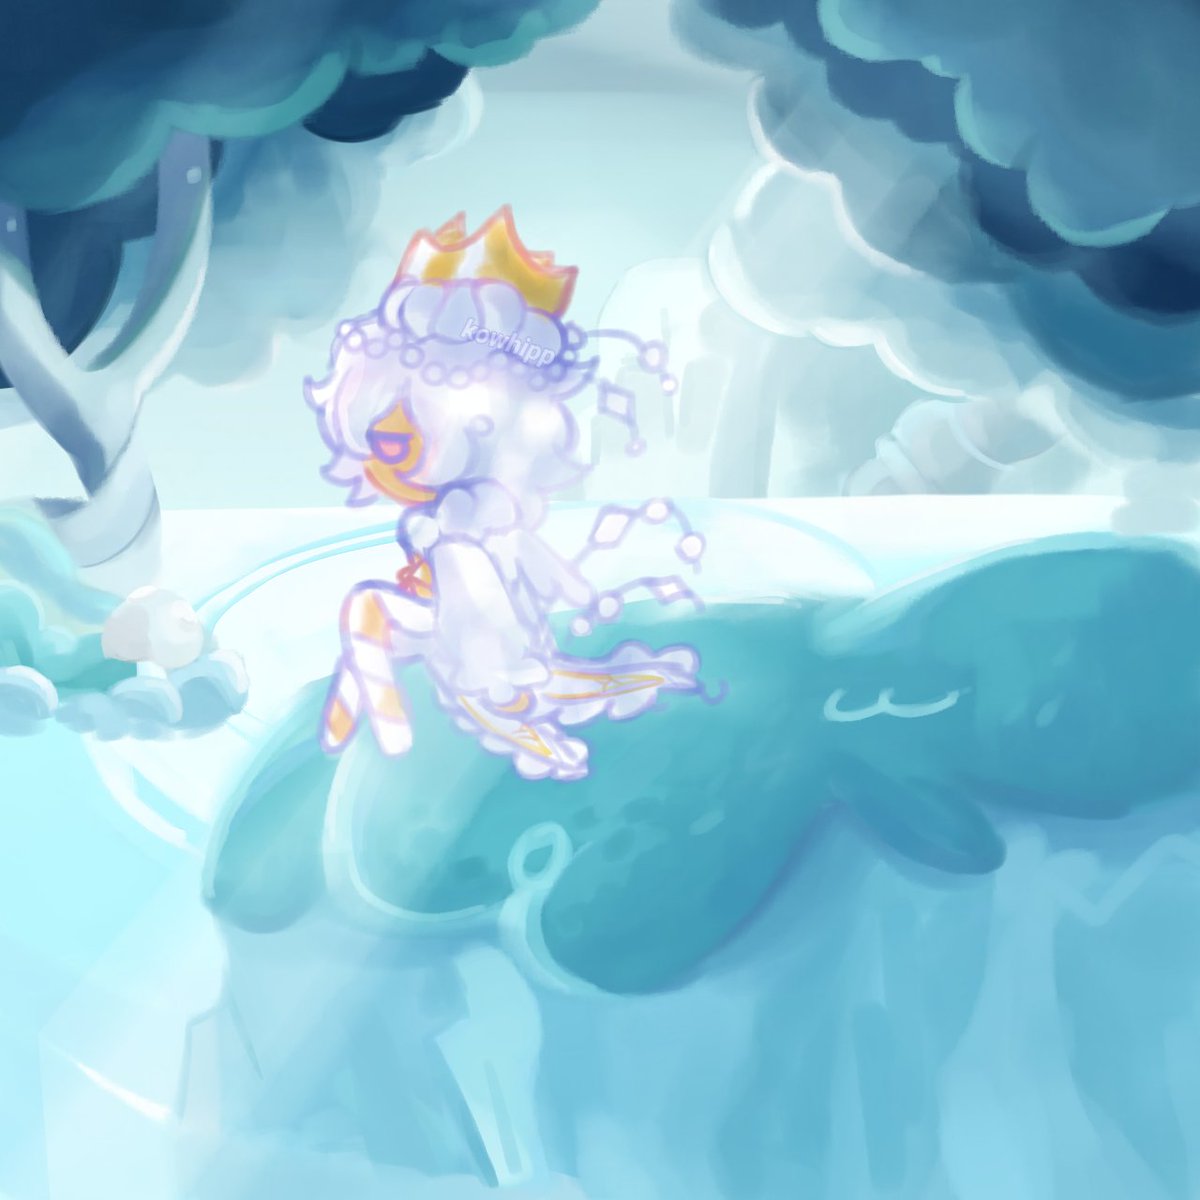 whippy for your troubles - - #cookierun #whippedcreamcookie #cookierunovenbreak + whipped-less version in replies!